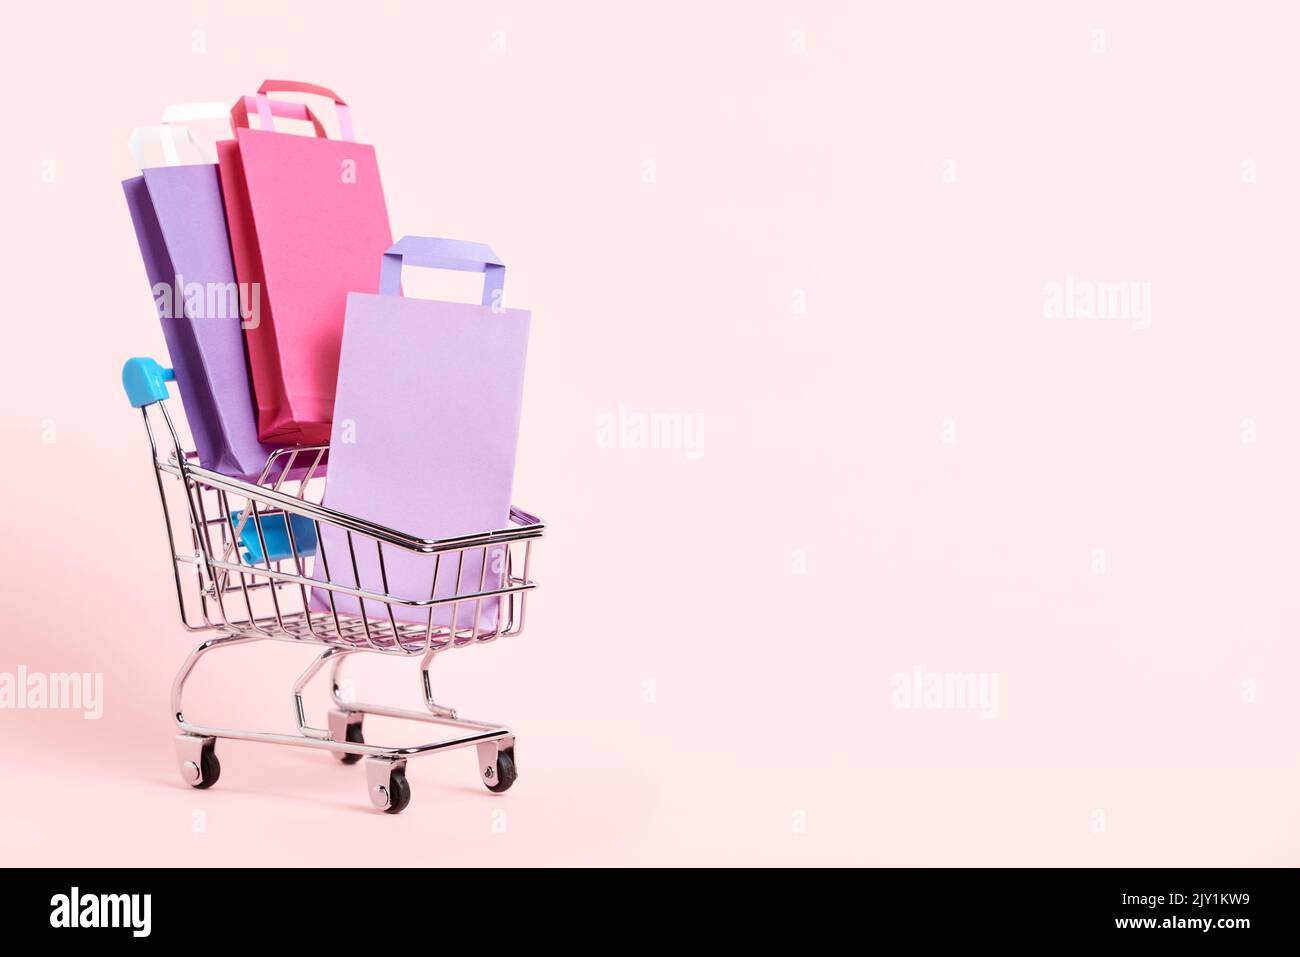 Shopping cart loaded with paper bags on a pastel pink background. Minimalist design with copy space. Concepts: market deals, seasonal sales and discou Stock Photo